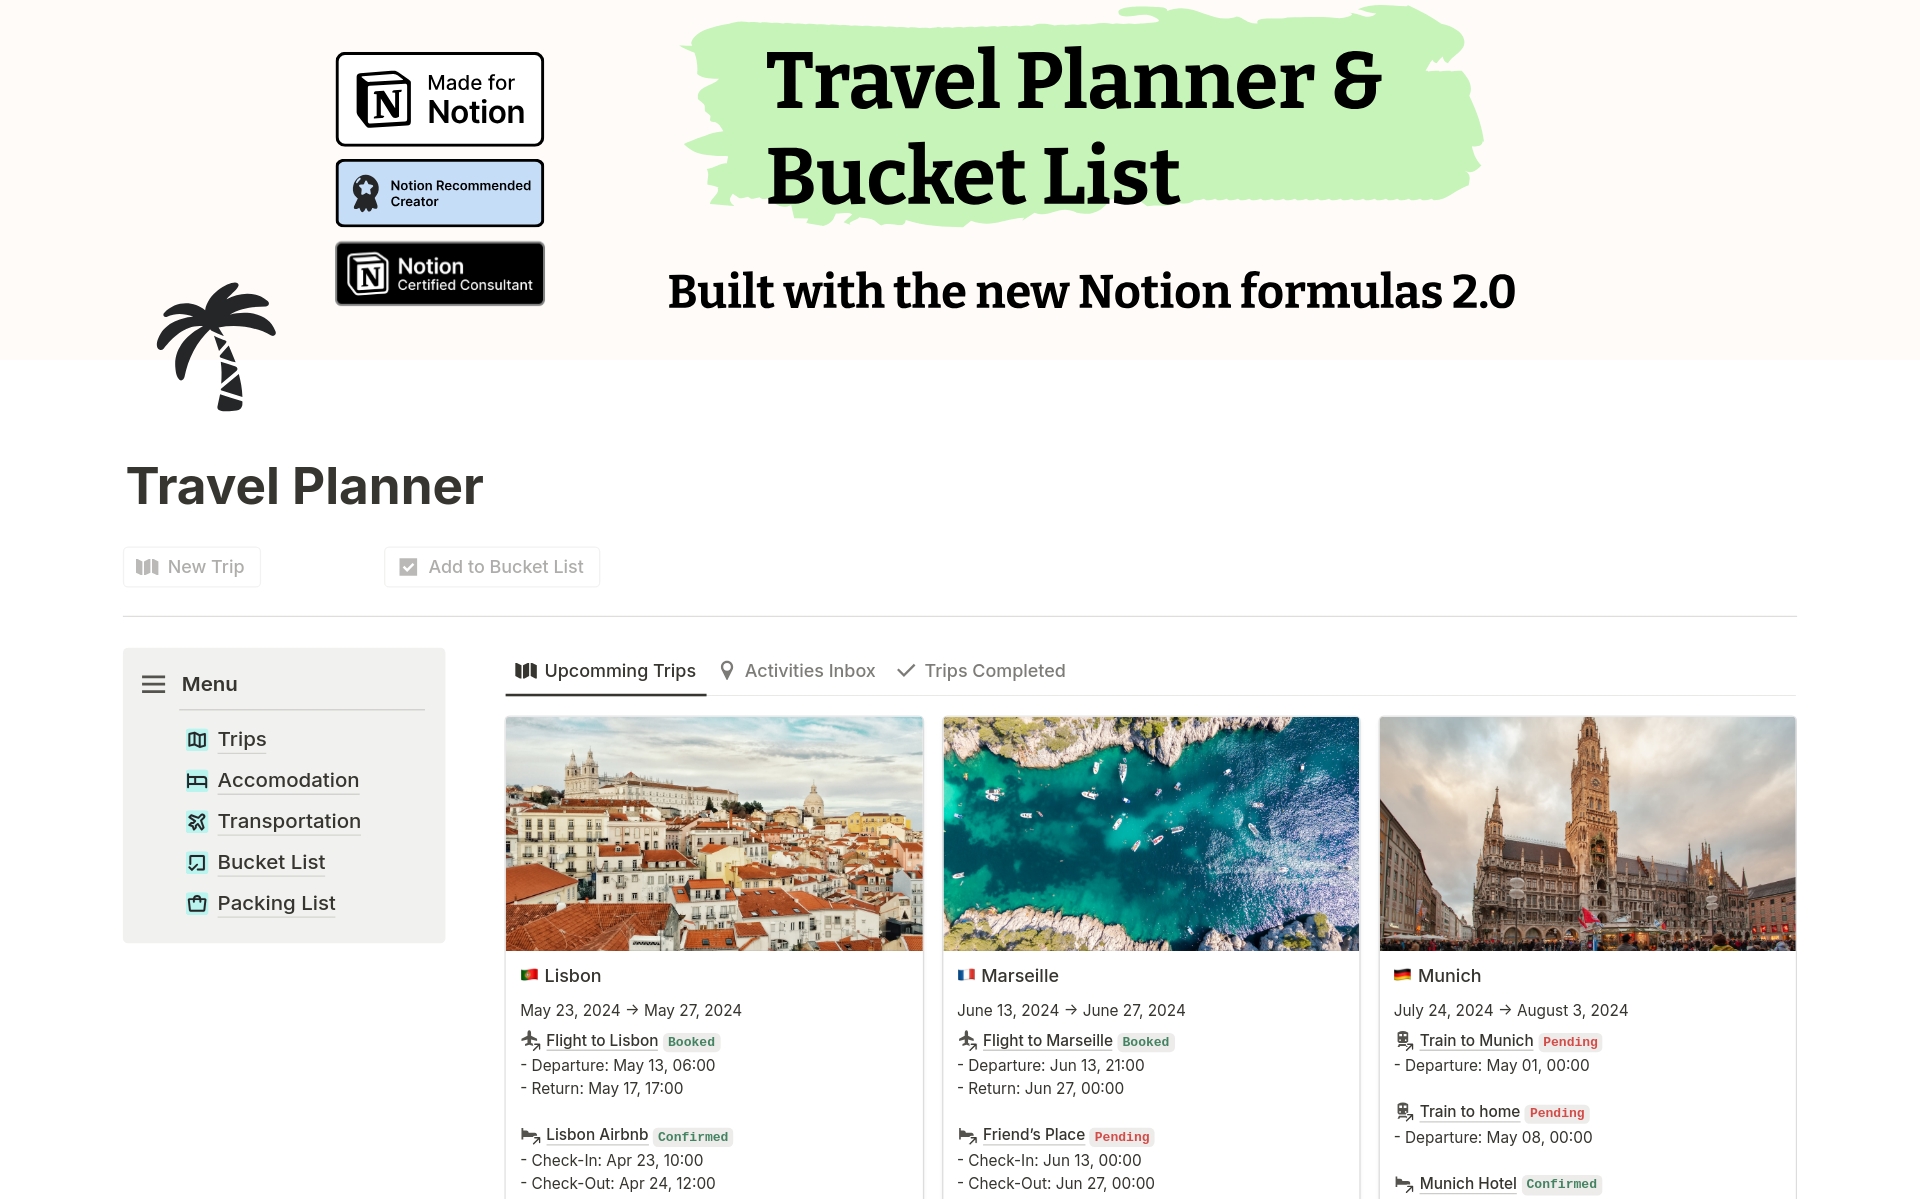 Preparing your trips has never been easier. Our travel organizer is here to simplify your trip planning process, keeping all your essential information in one convenient place.